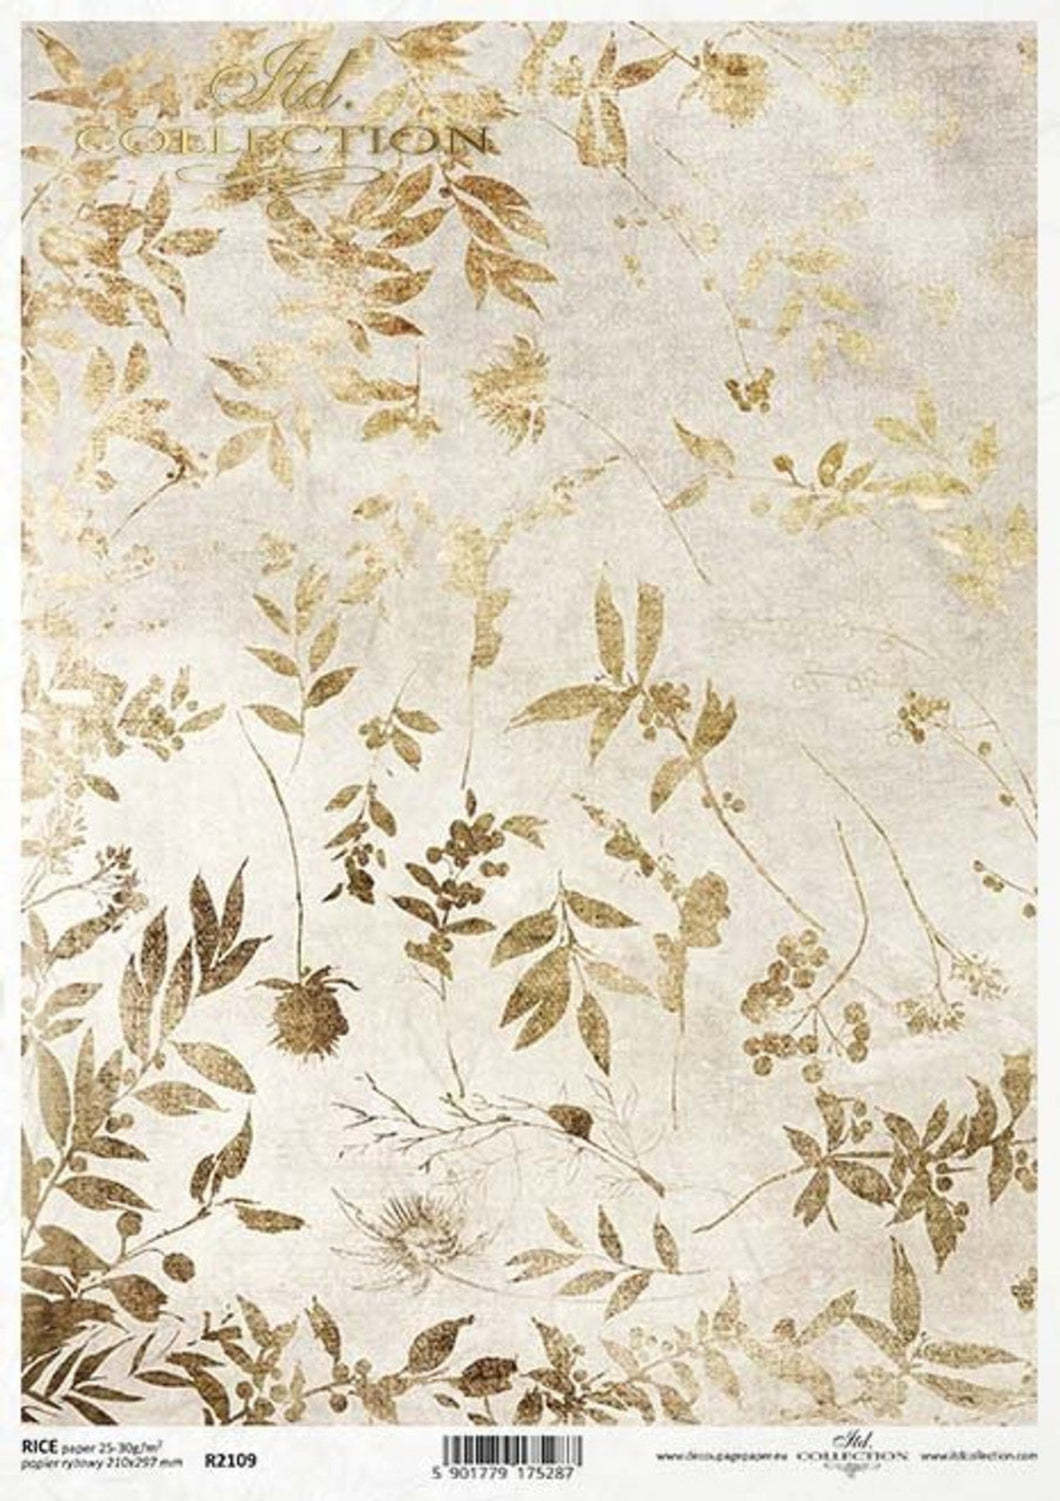 Gold Leaves on Ivory Rice Paper by ITD Collection, R2109, A4